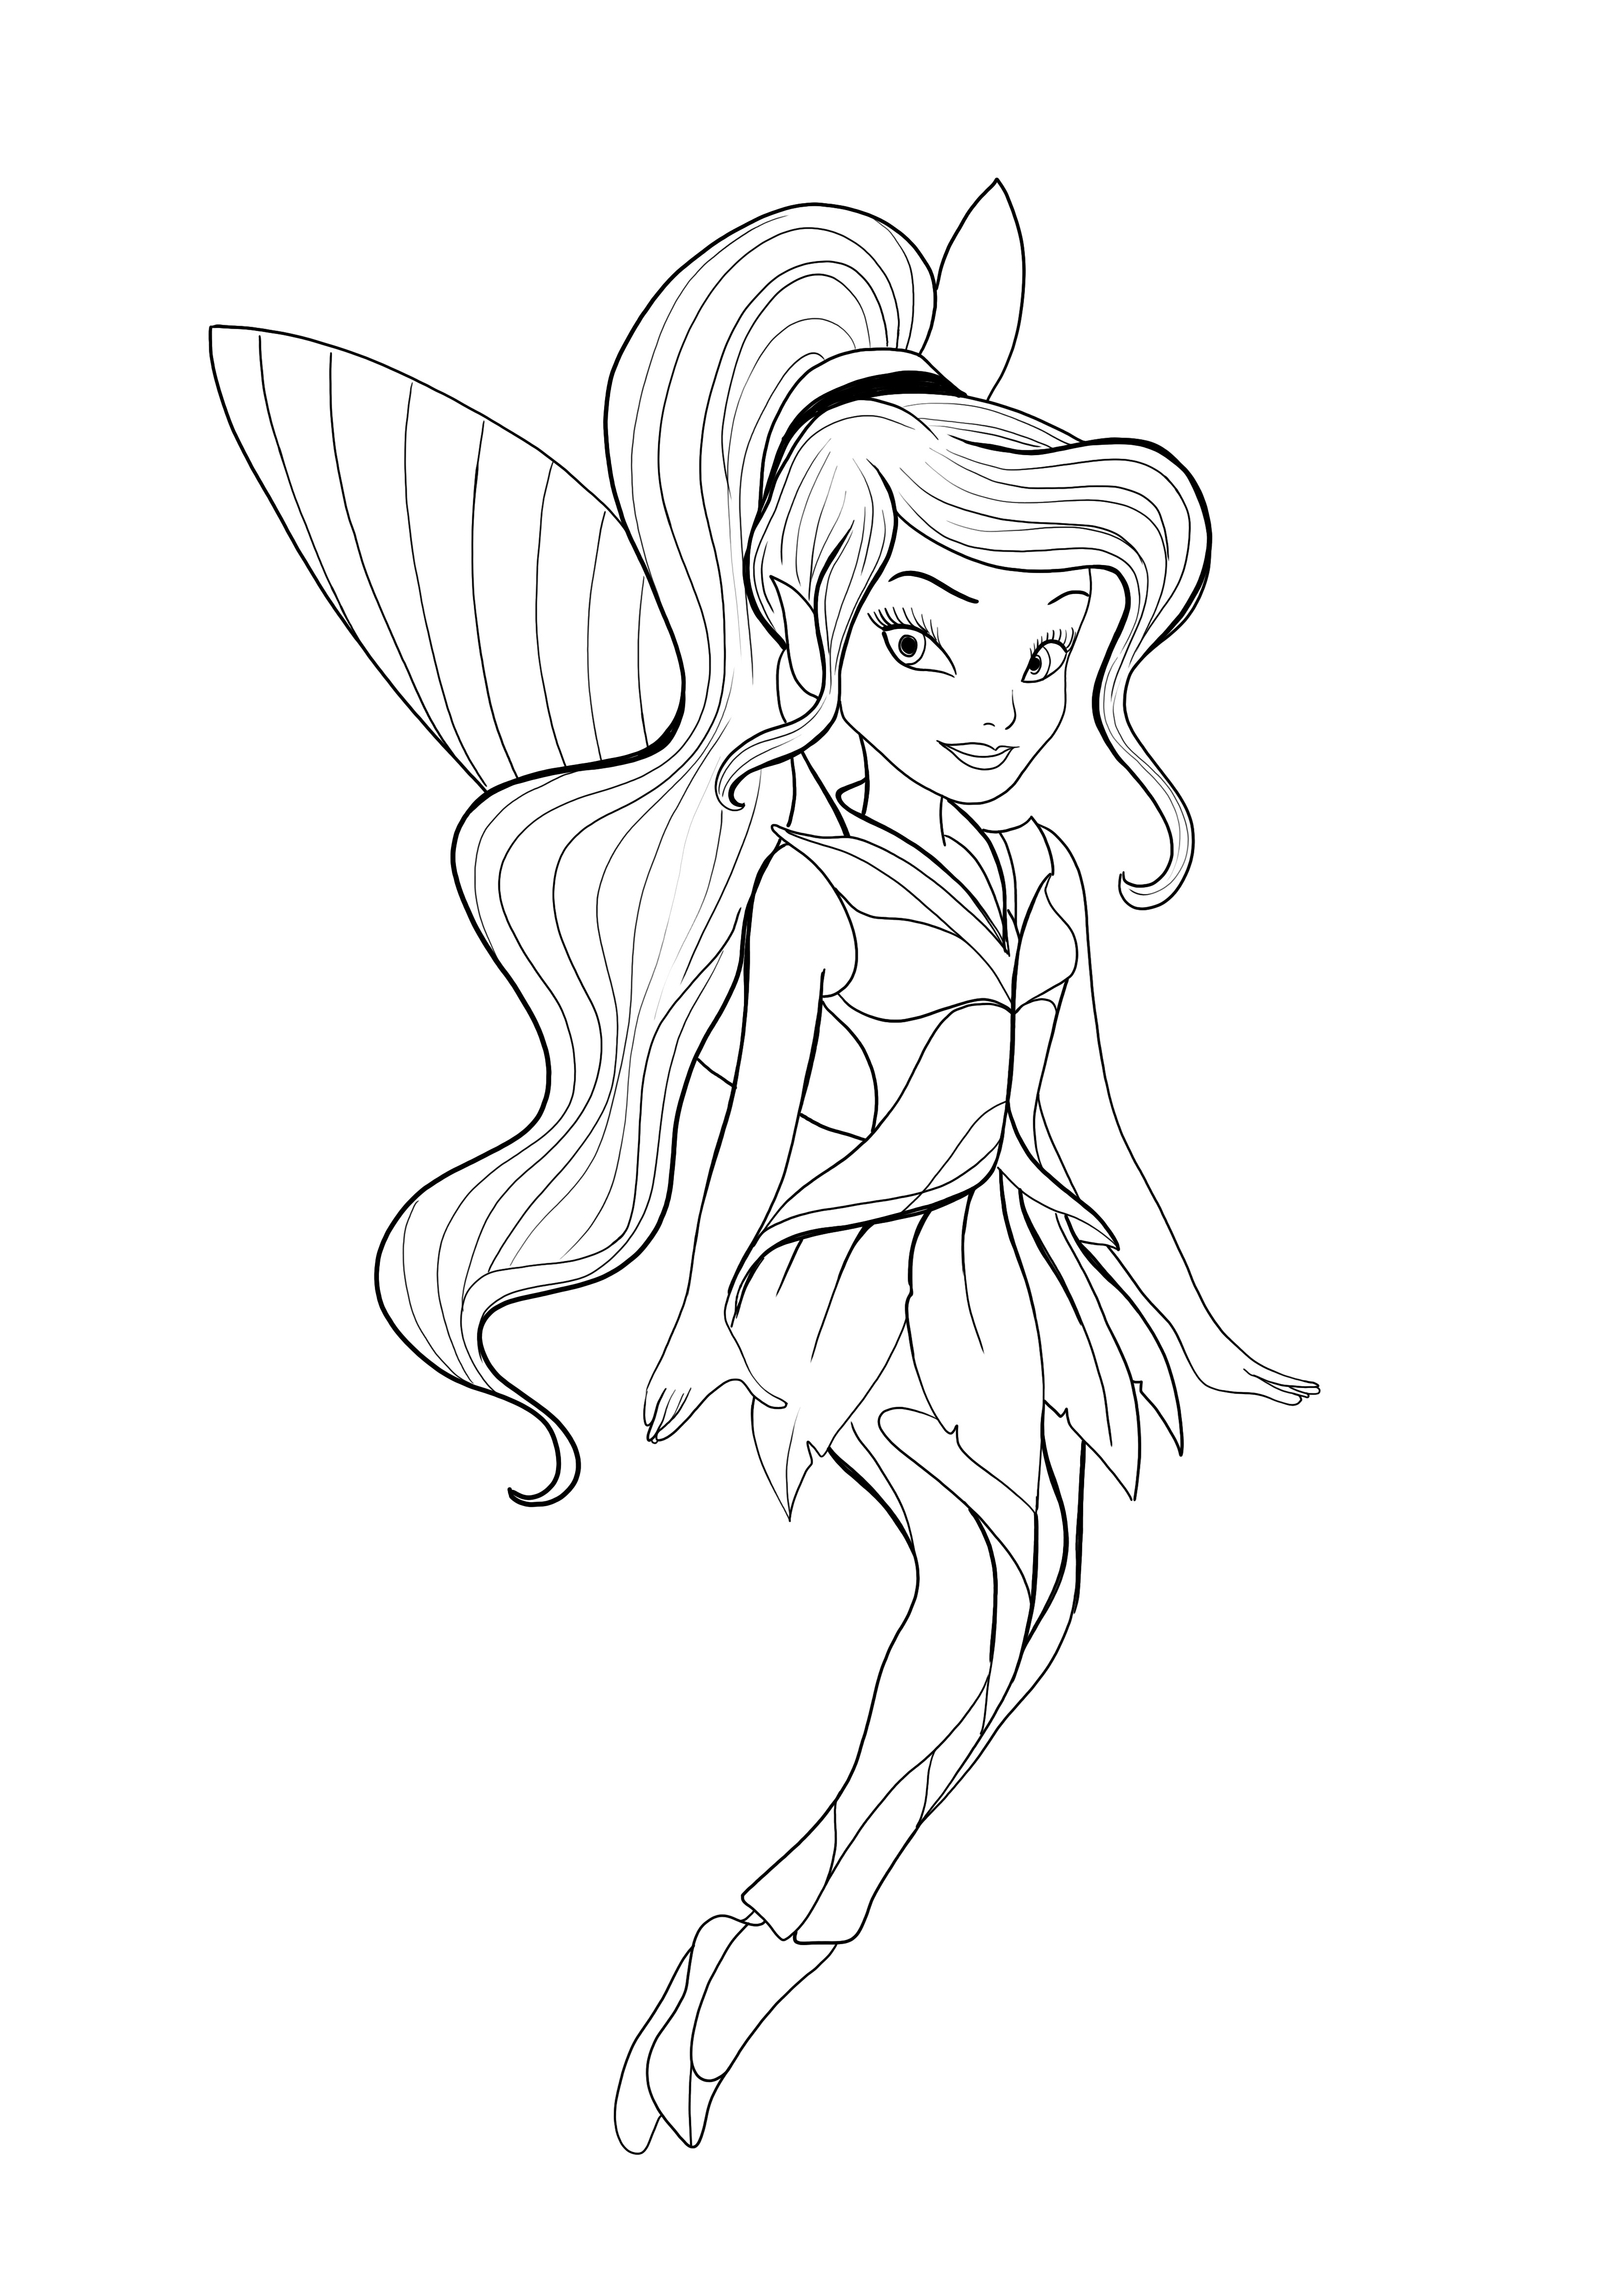 Disney Fairy Vidia Coloring Pages